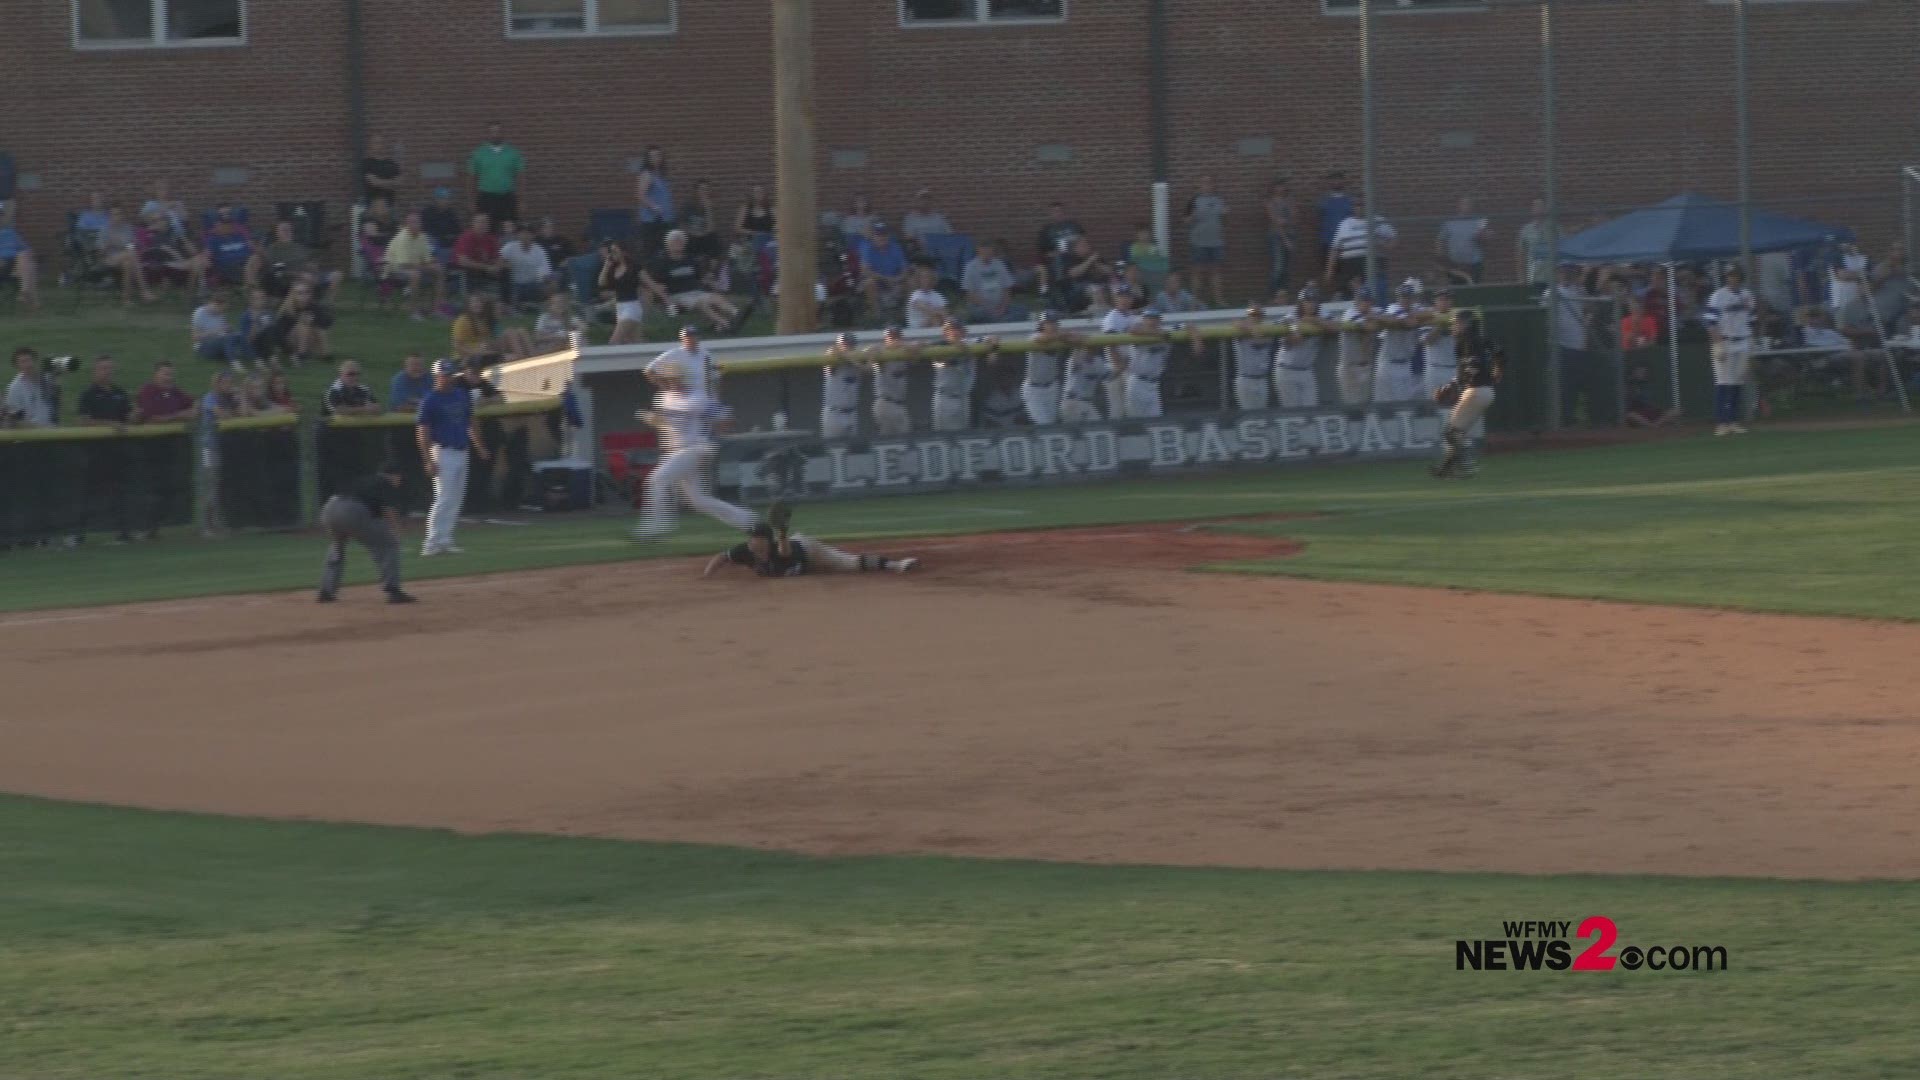 The Ledford High School baseball team defeated top-seeded North Lincoln 2-0 to advance to the 2A State Baseball Championship Series Thursday night.